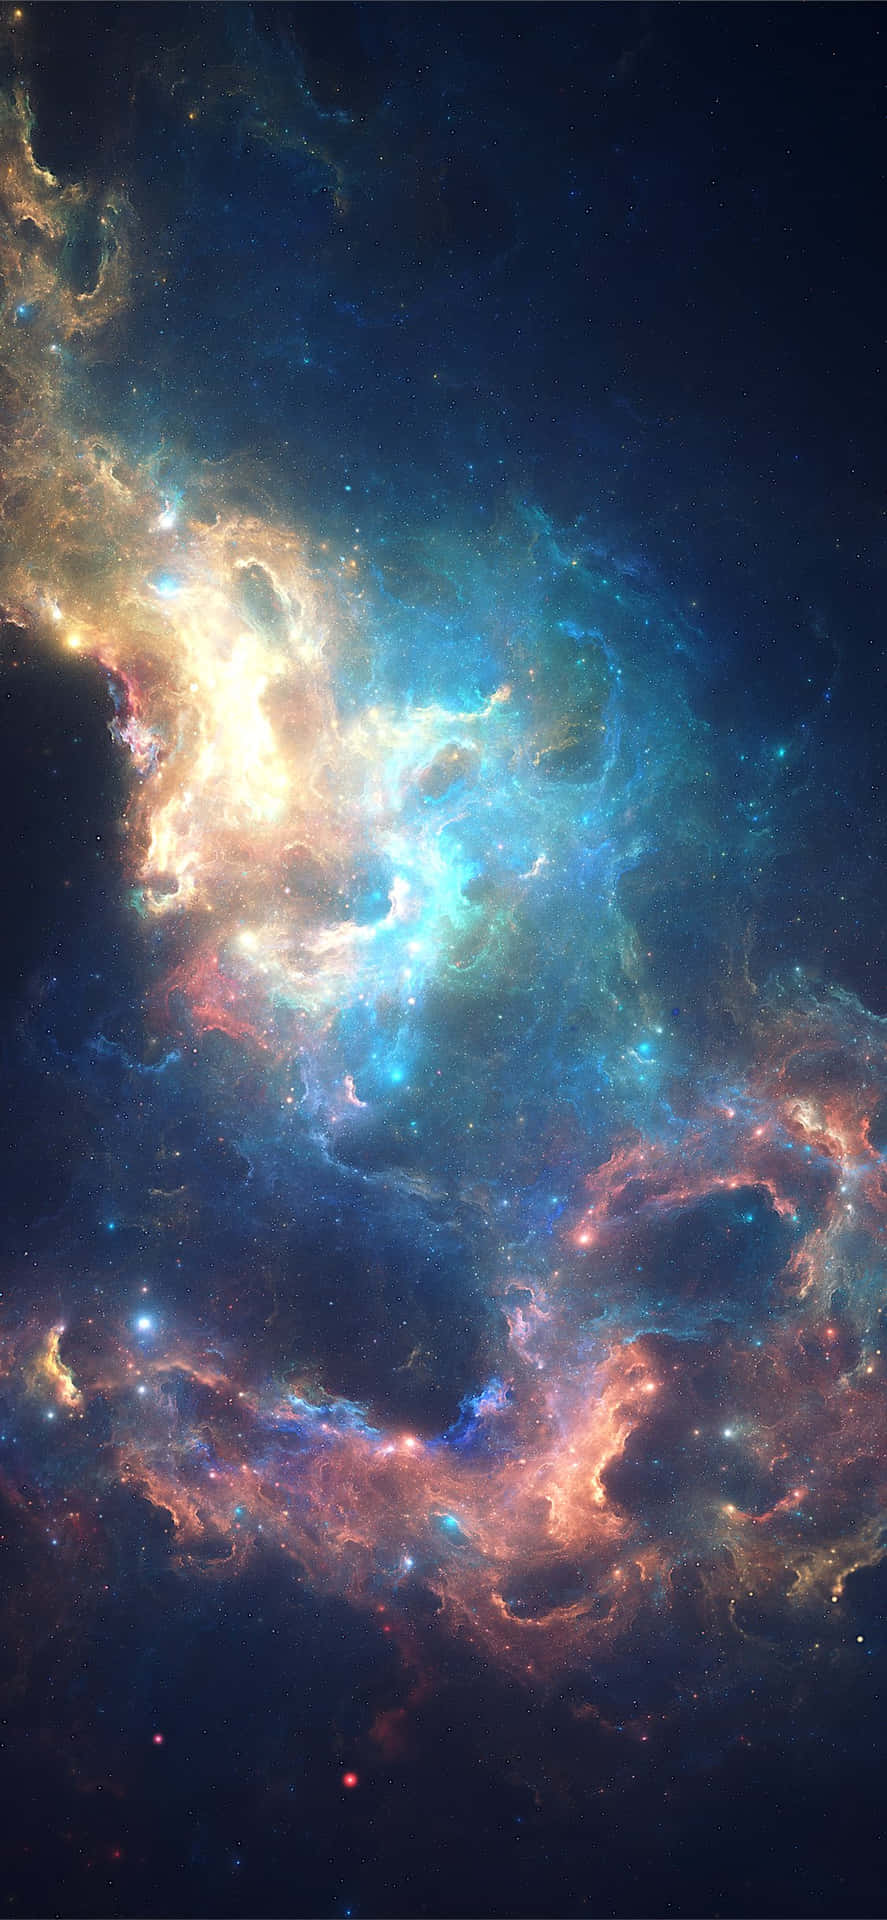 Get out of this world when you upgrade to the Blue Galaxy iPhone Wallpaper